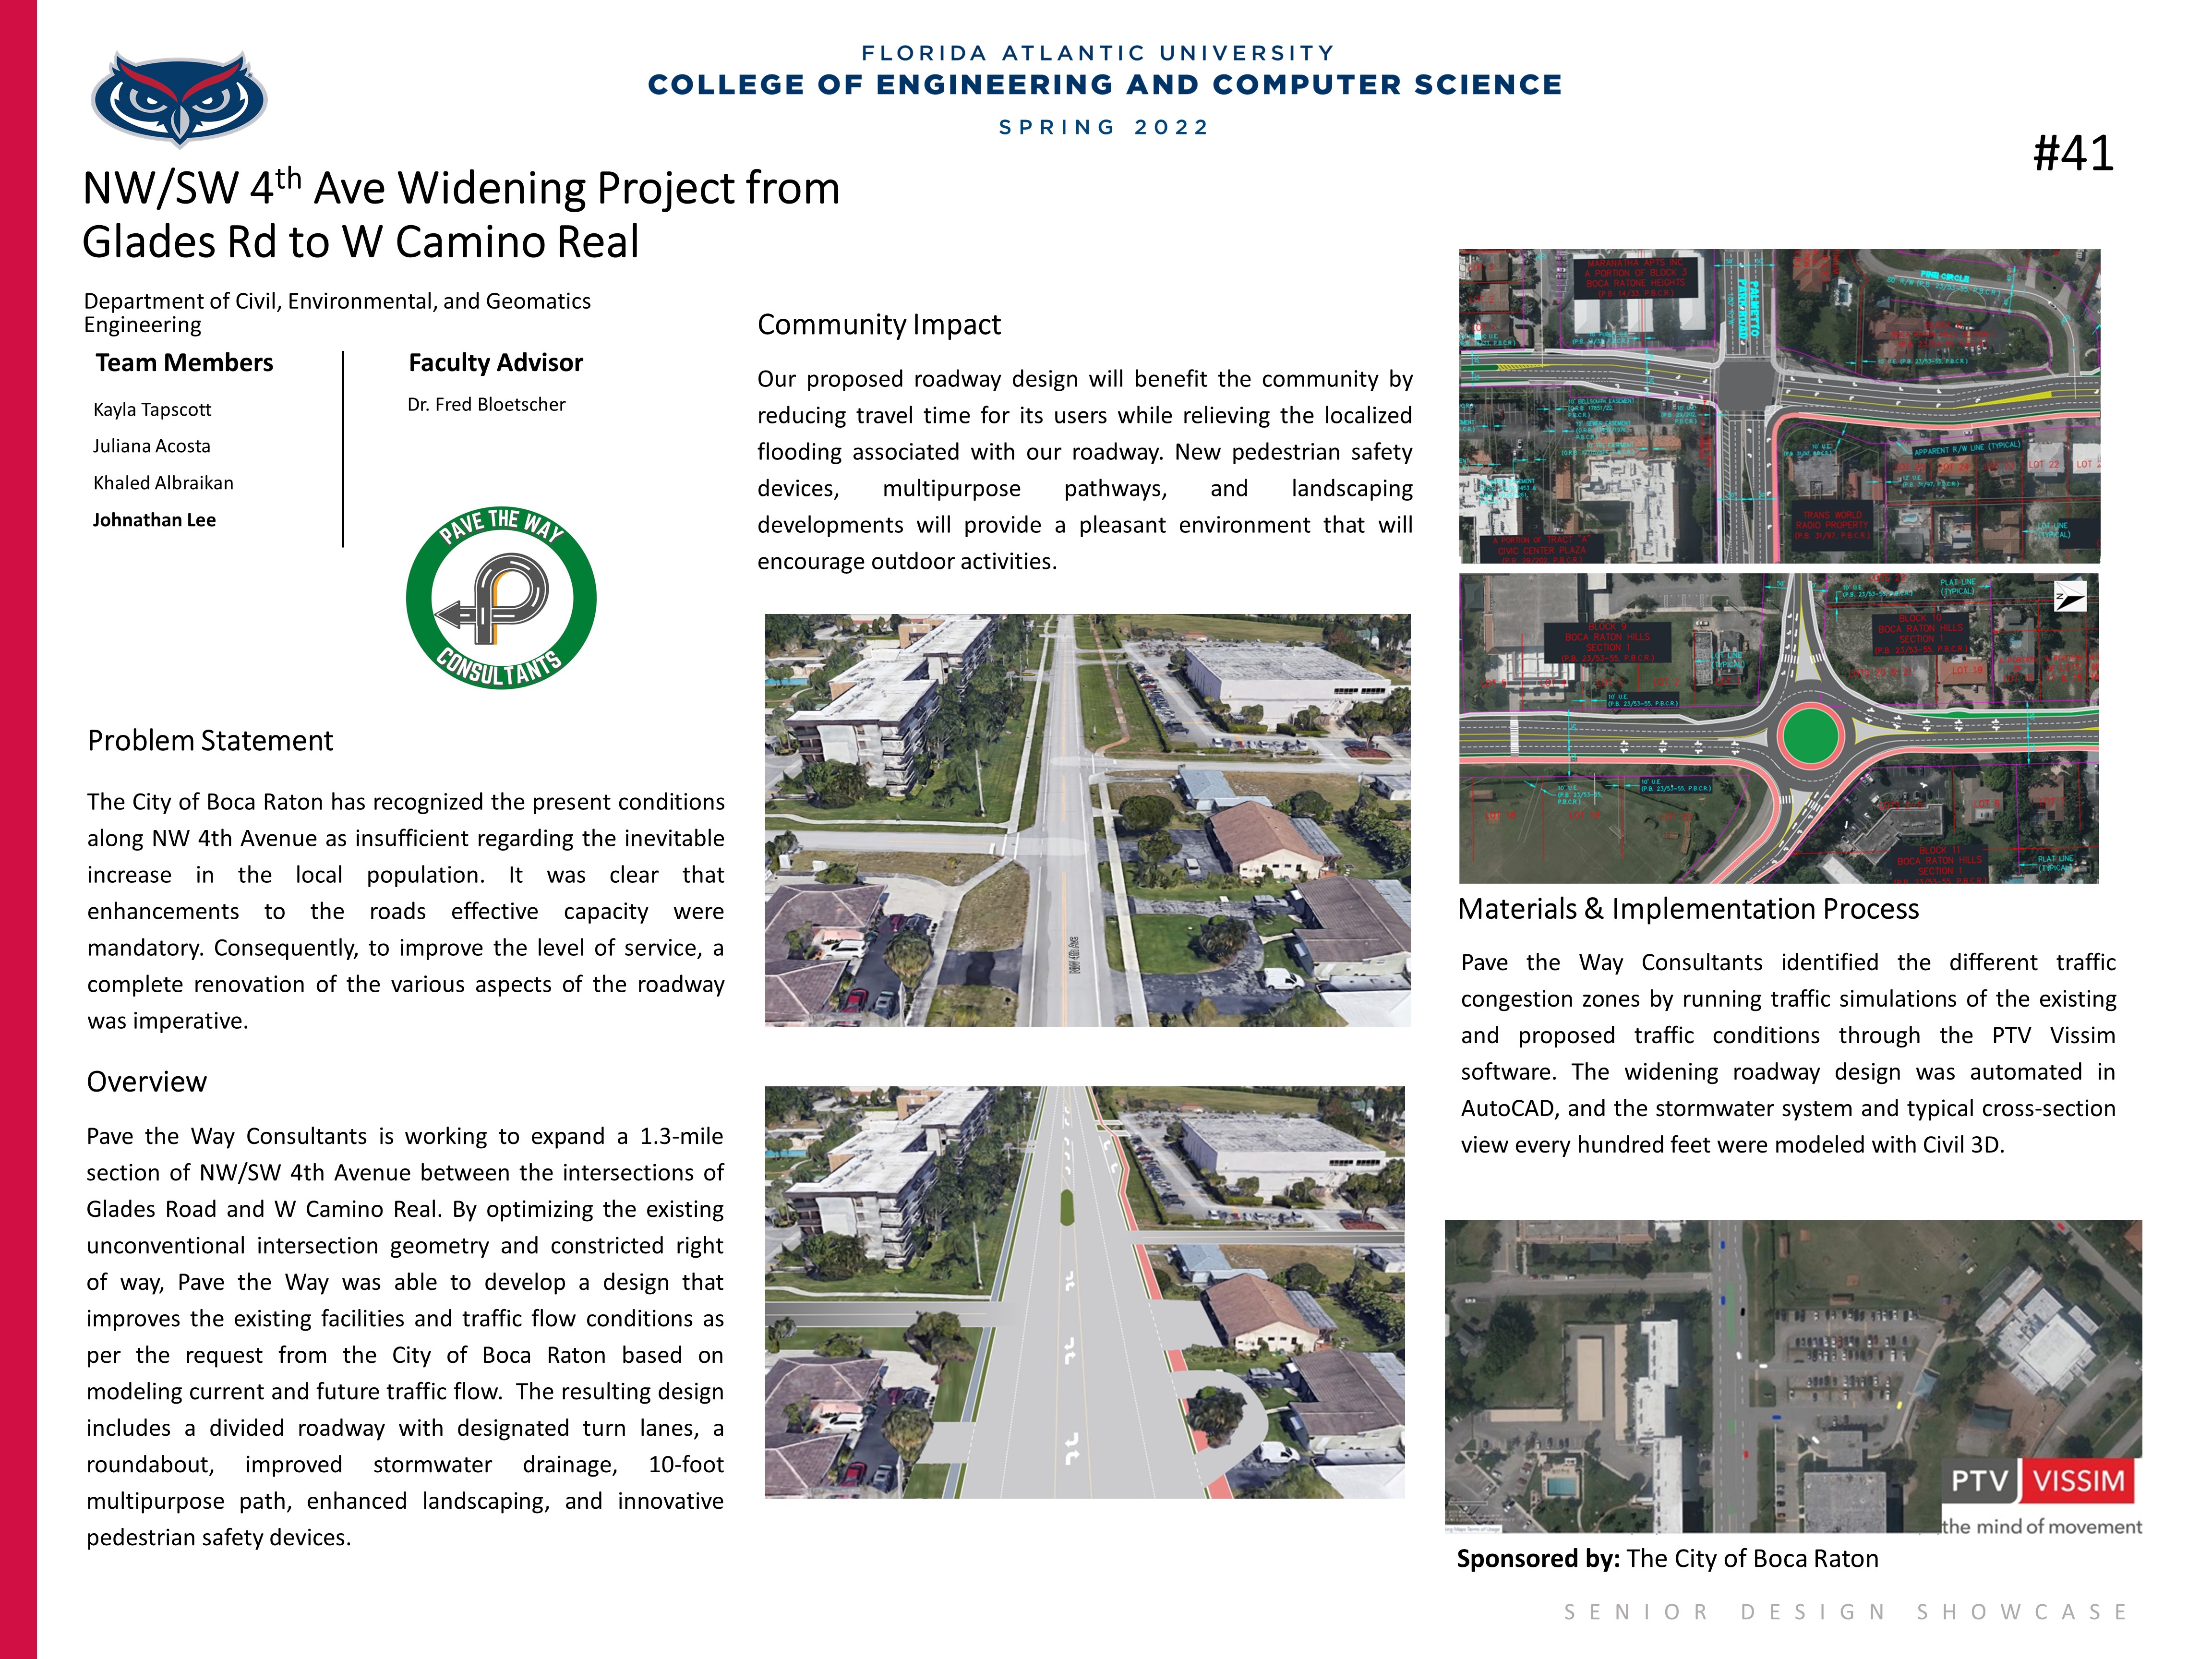 NW/SW 4th Avenue Road Widening Project